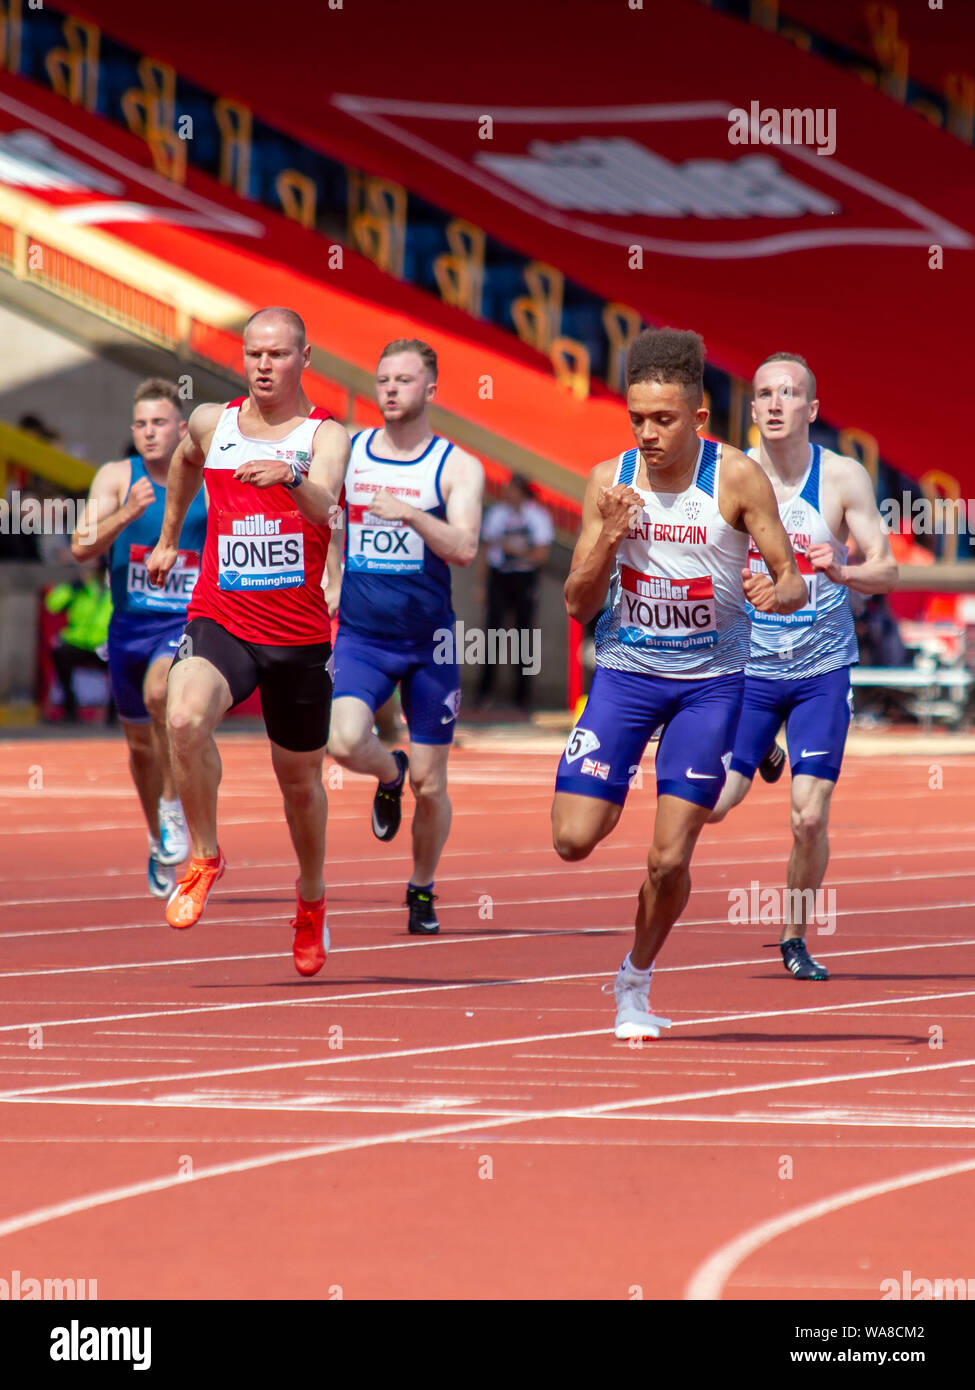 Competitors in action in the men's T35 / 38 100 metres, including Great Britain's Rhys Jones, George Fox and Thomas Young, during the Birmingham 2019 Müller Grand Prix, at the Alexander Stadium, Birmingham. Stock Photo